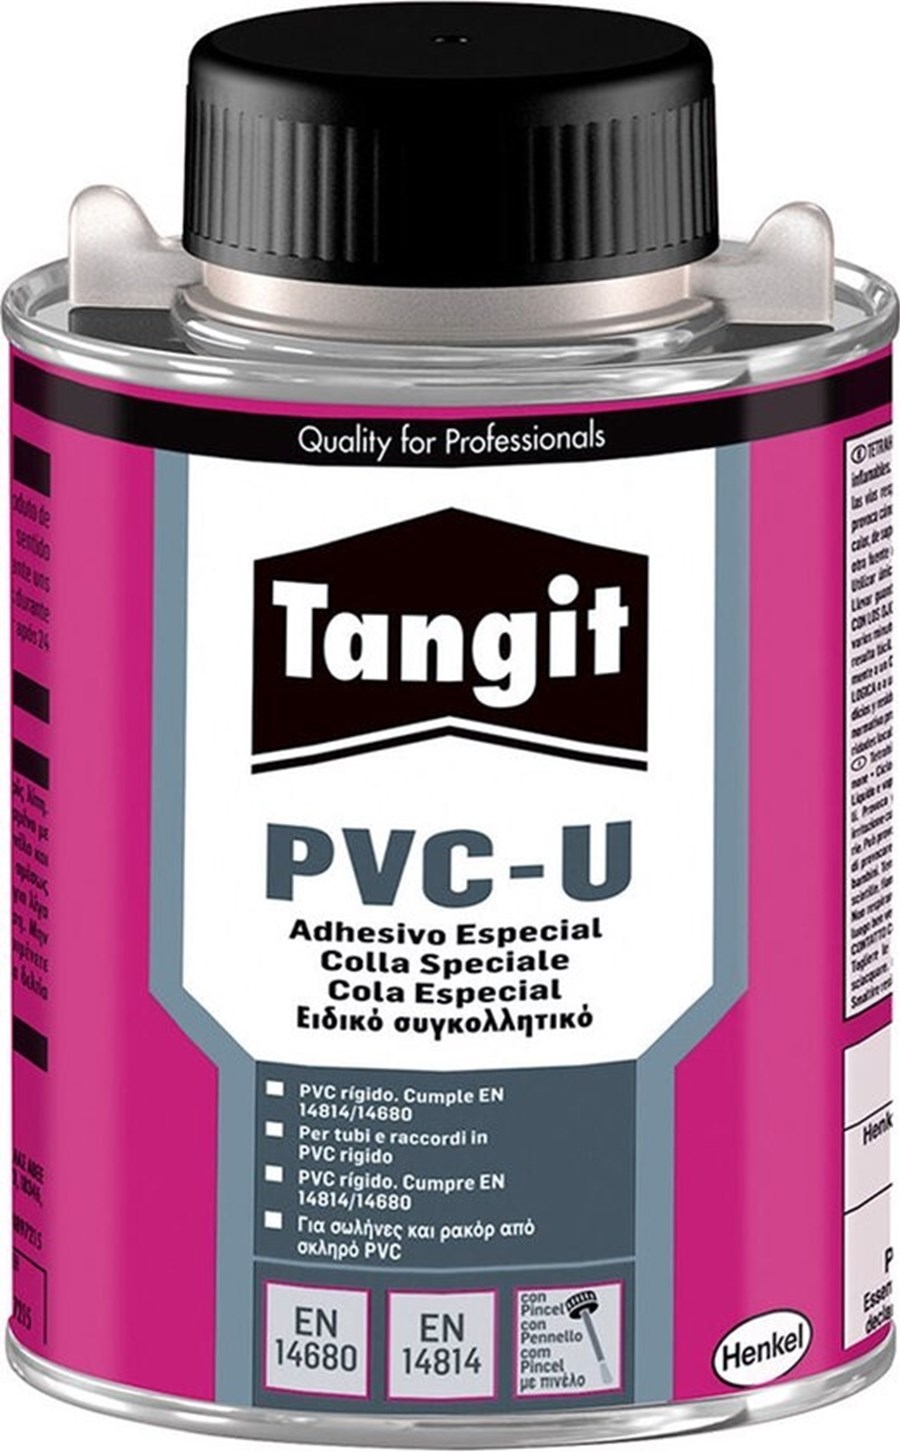 Tangit 1000ml canister